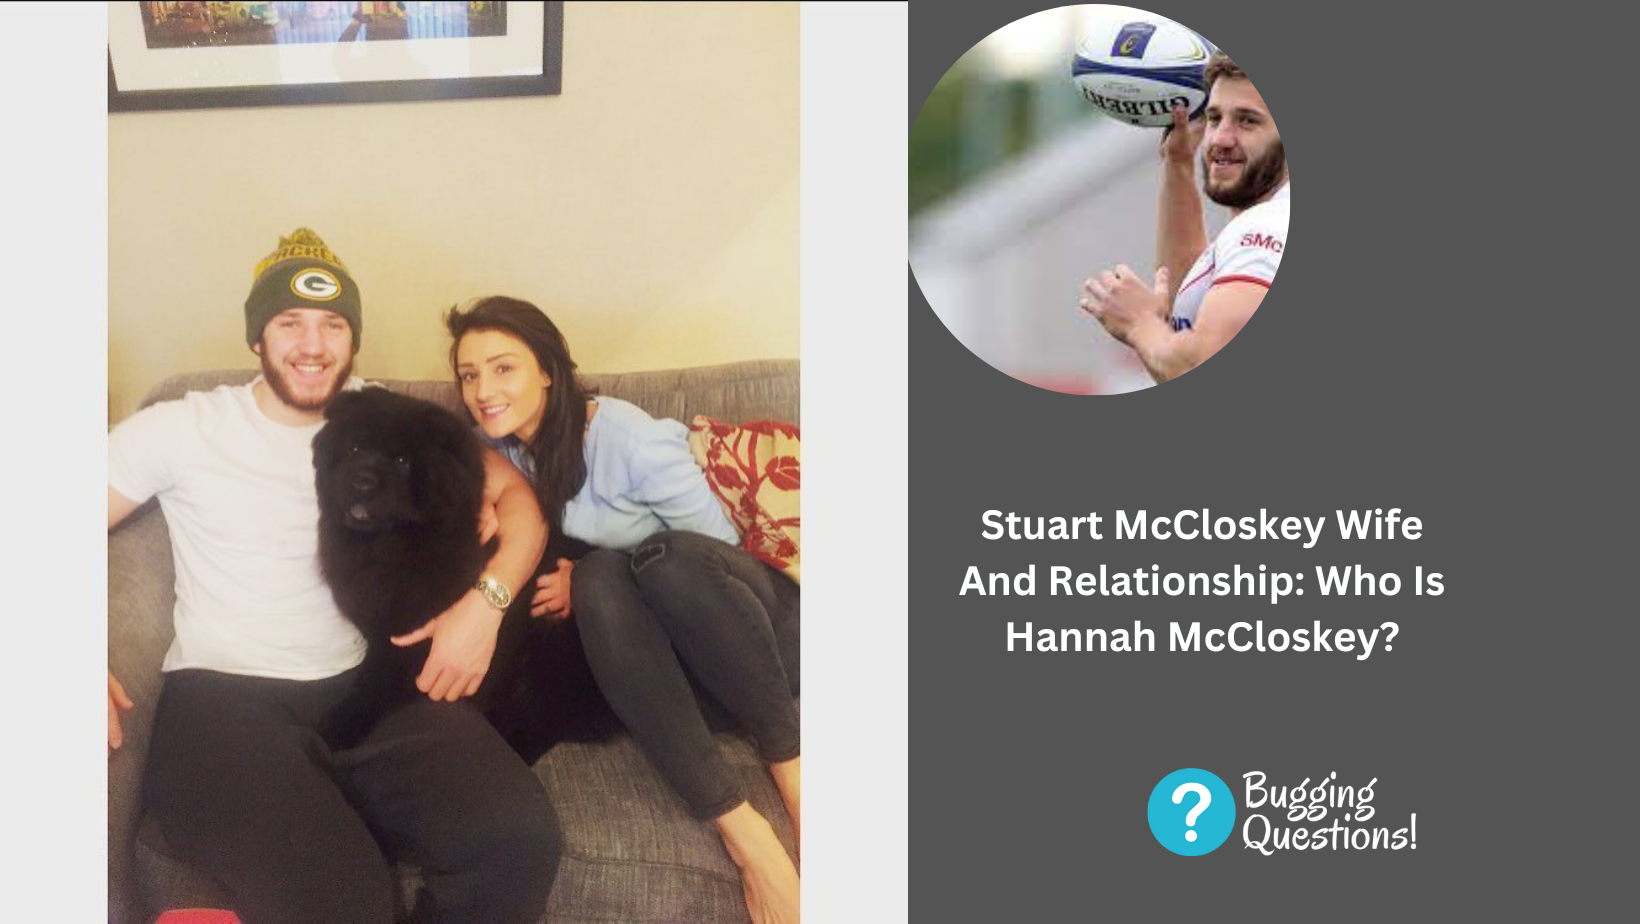 Stuart McCloskey Wife And Relationship: Who Is Hannah McCloskey?